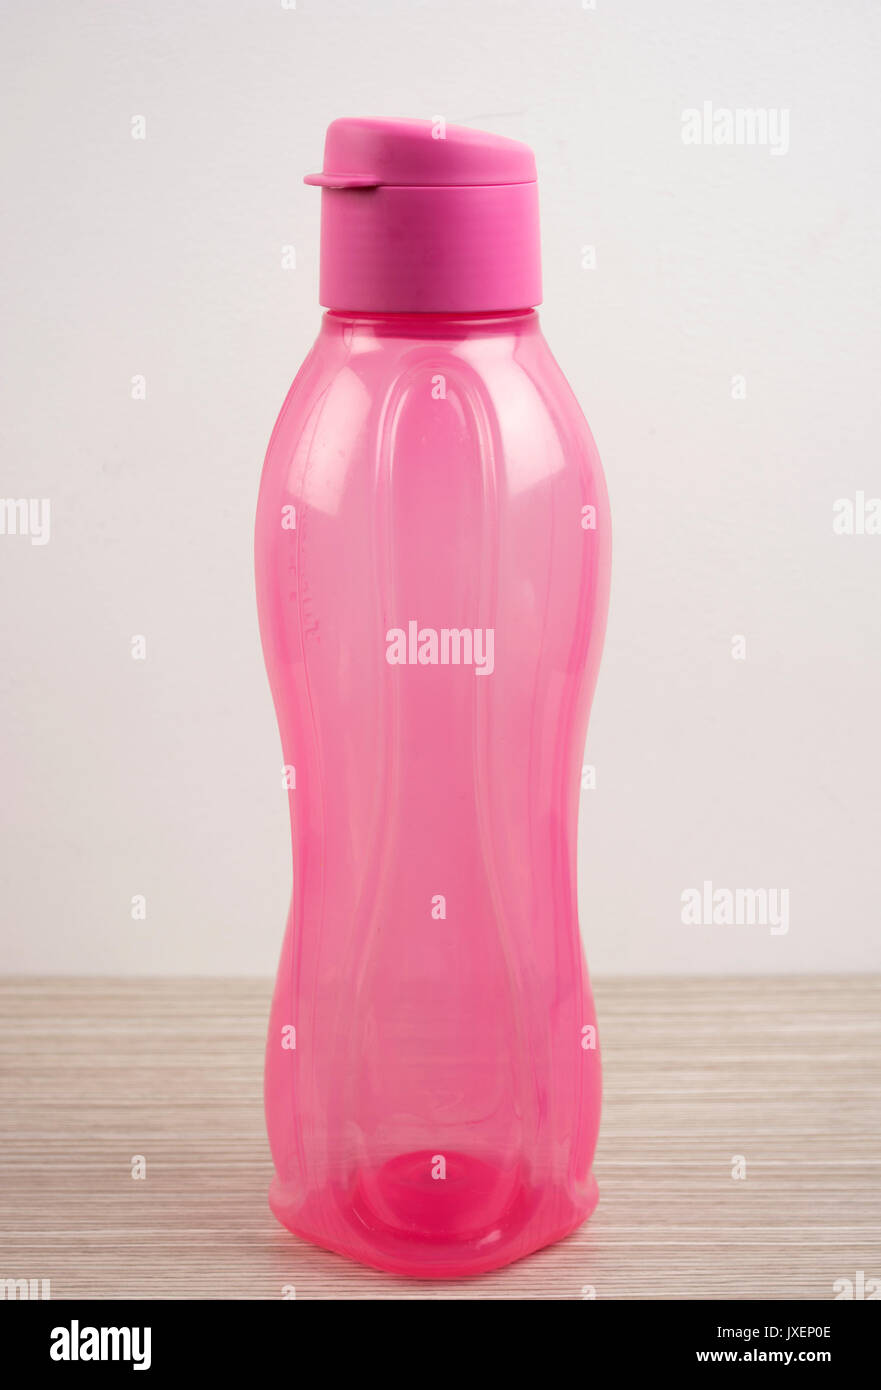 Plastic pink no name shampoo container. Stock Photo